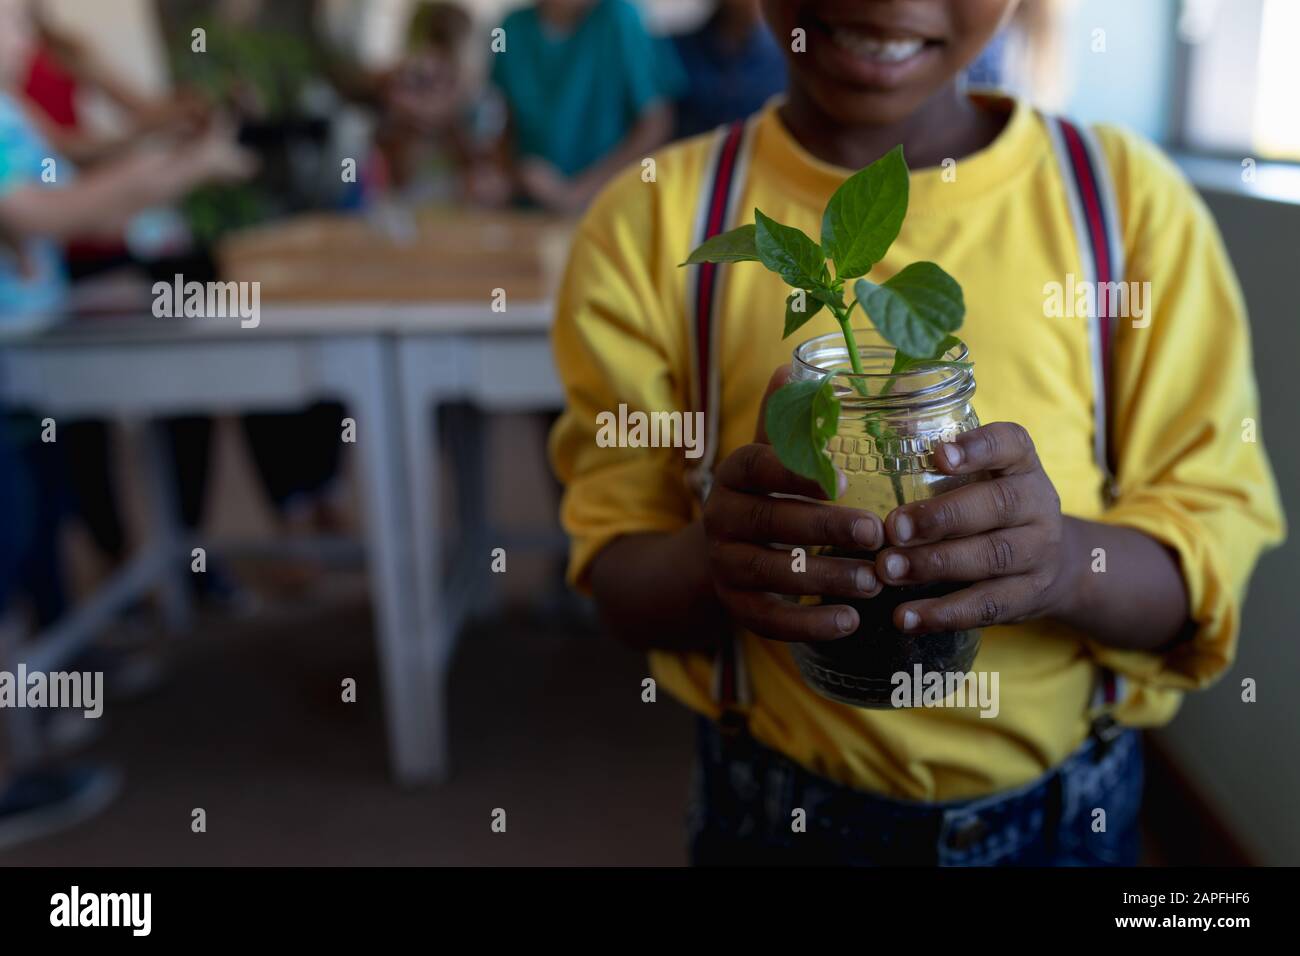 Schoolboy standing holding a seedling plant in a jar of earth in an elementary school classroom Stock Photo